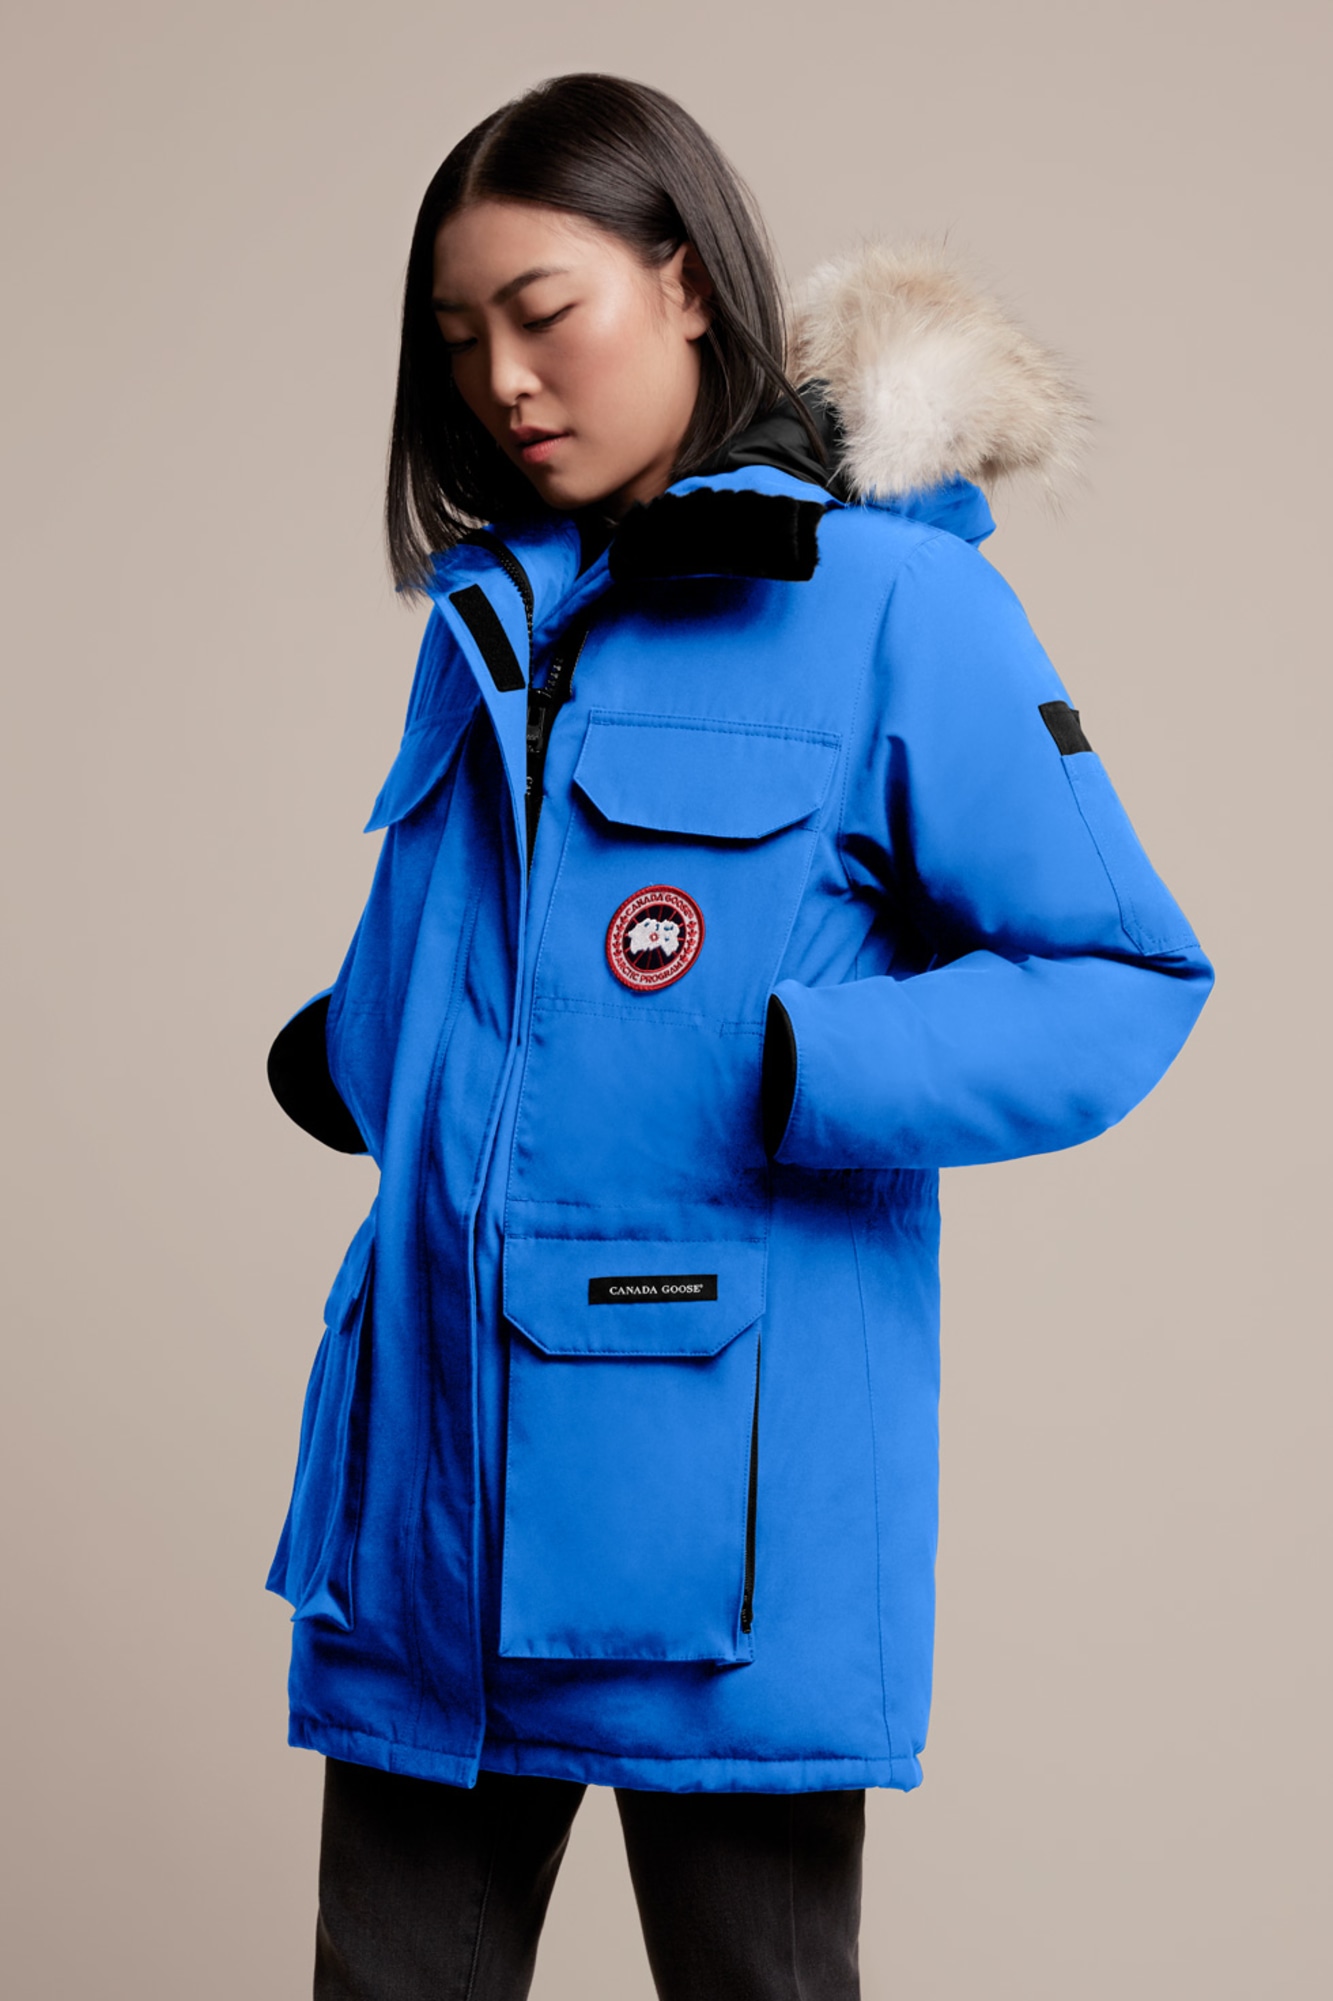 Canada Goose Fur Replacement Cost Women S Pbi Expedition Parka Fusion Fit Canada Goose